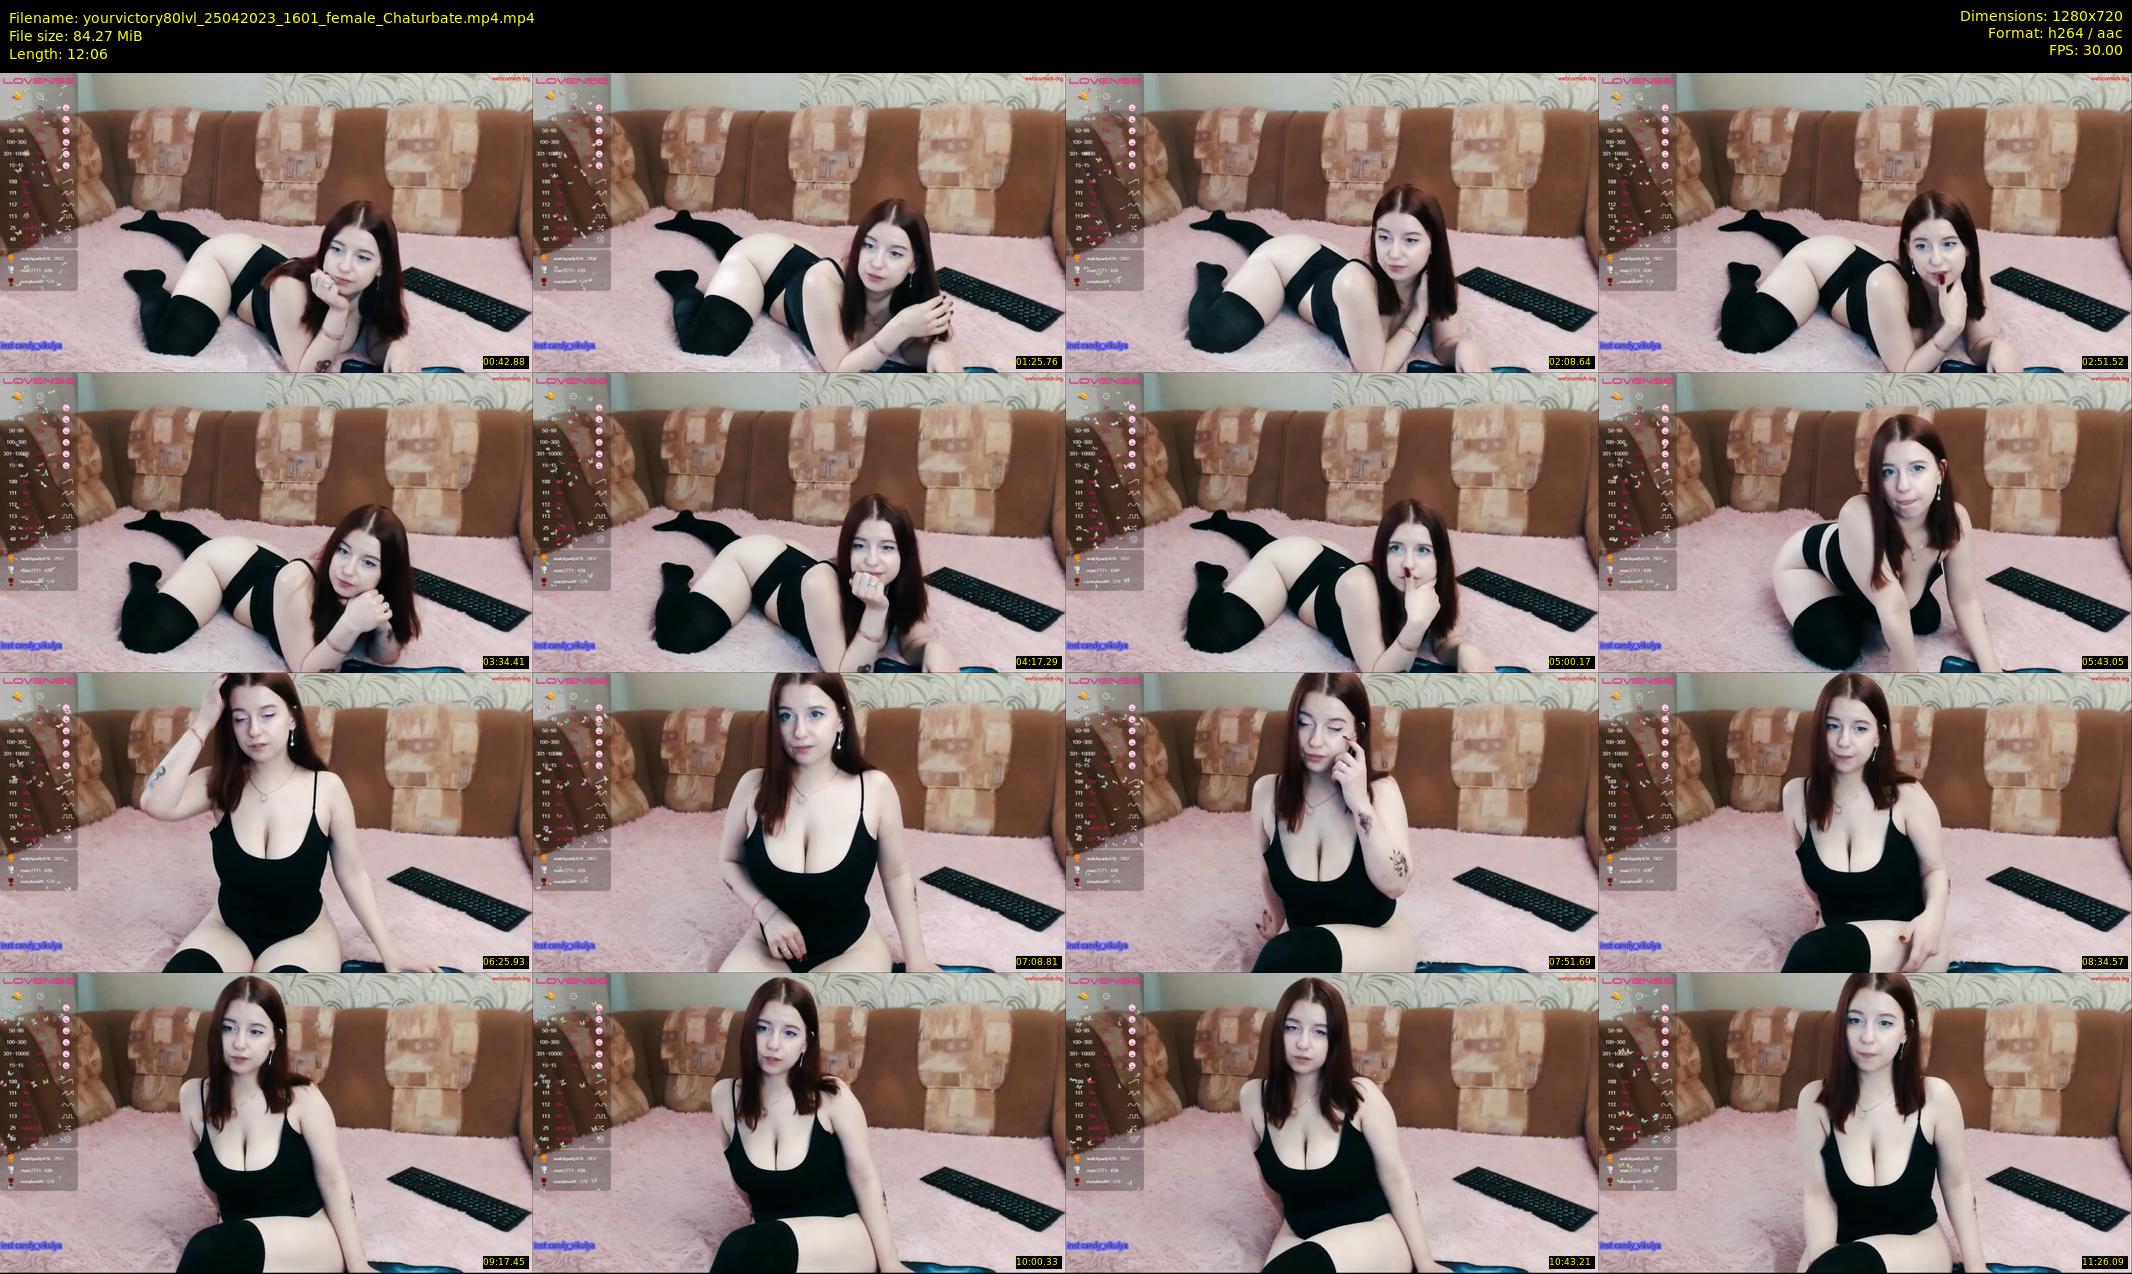 yourvictory80lvl 250423 1601 Chaturbate female - Camvideos.me